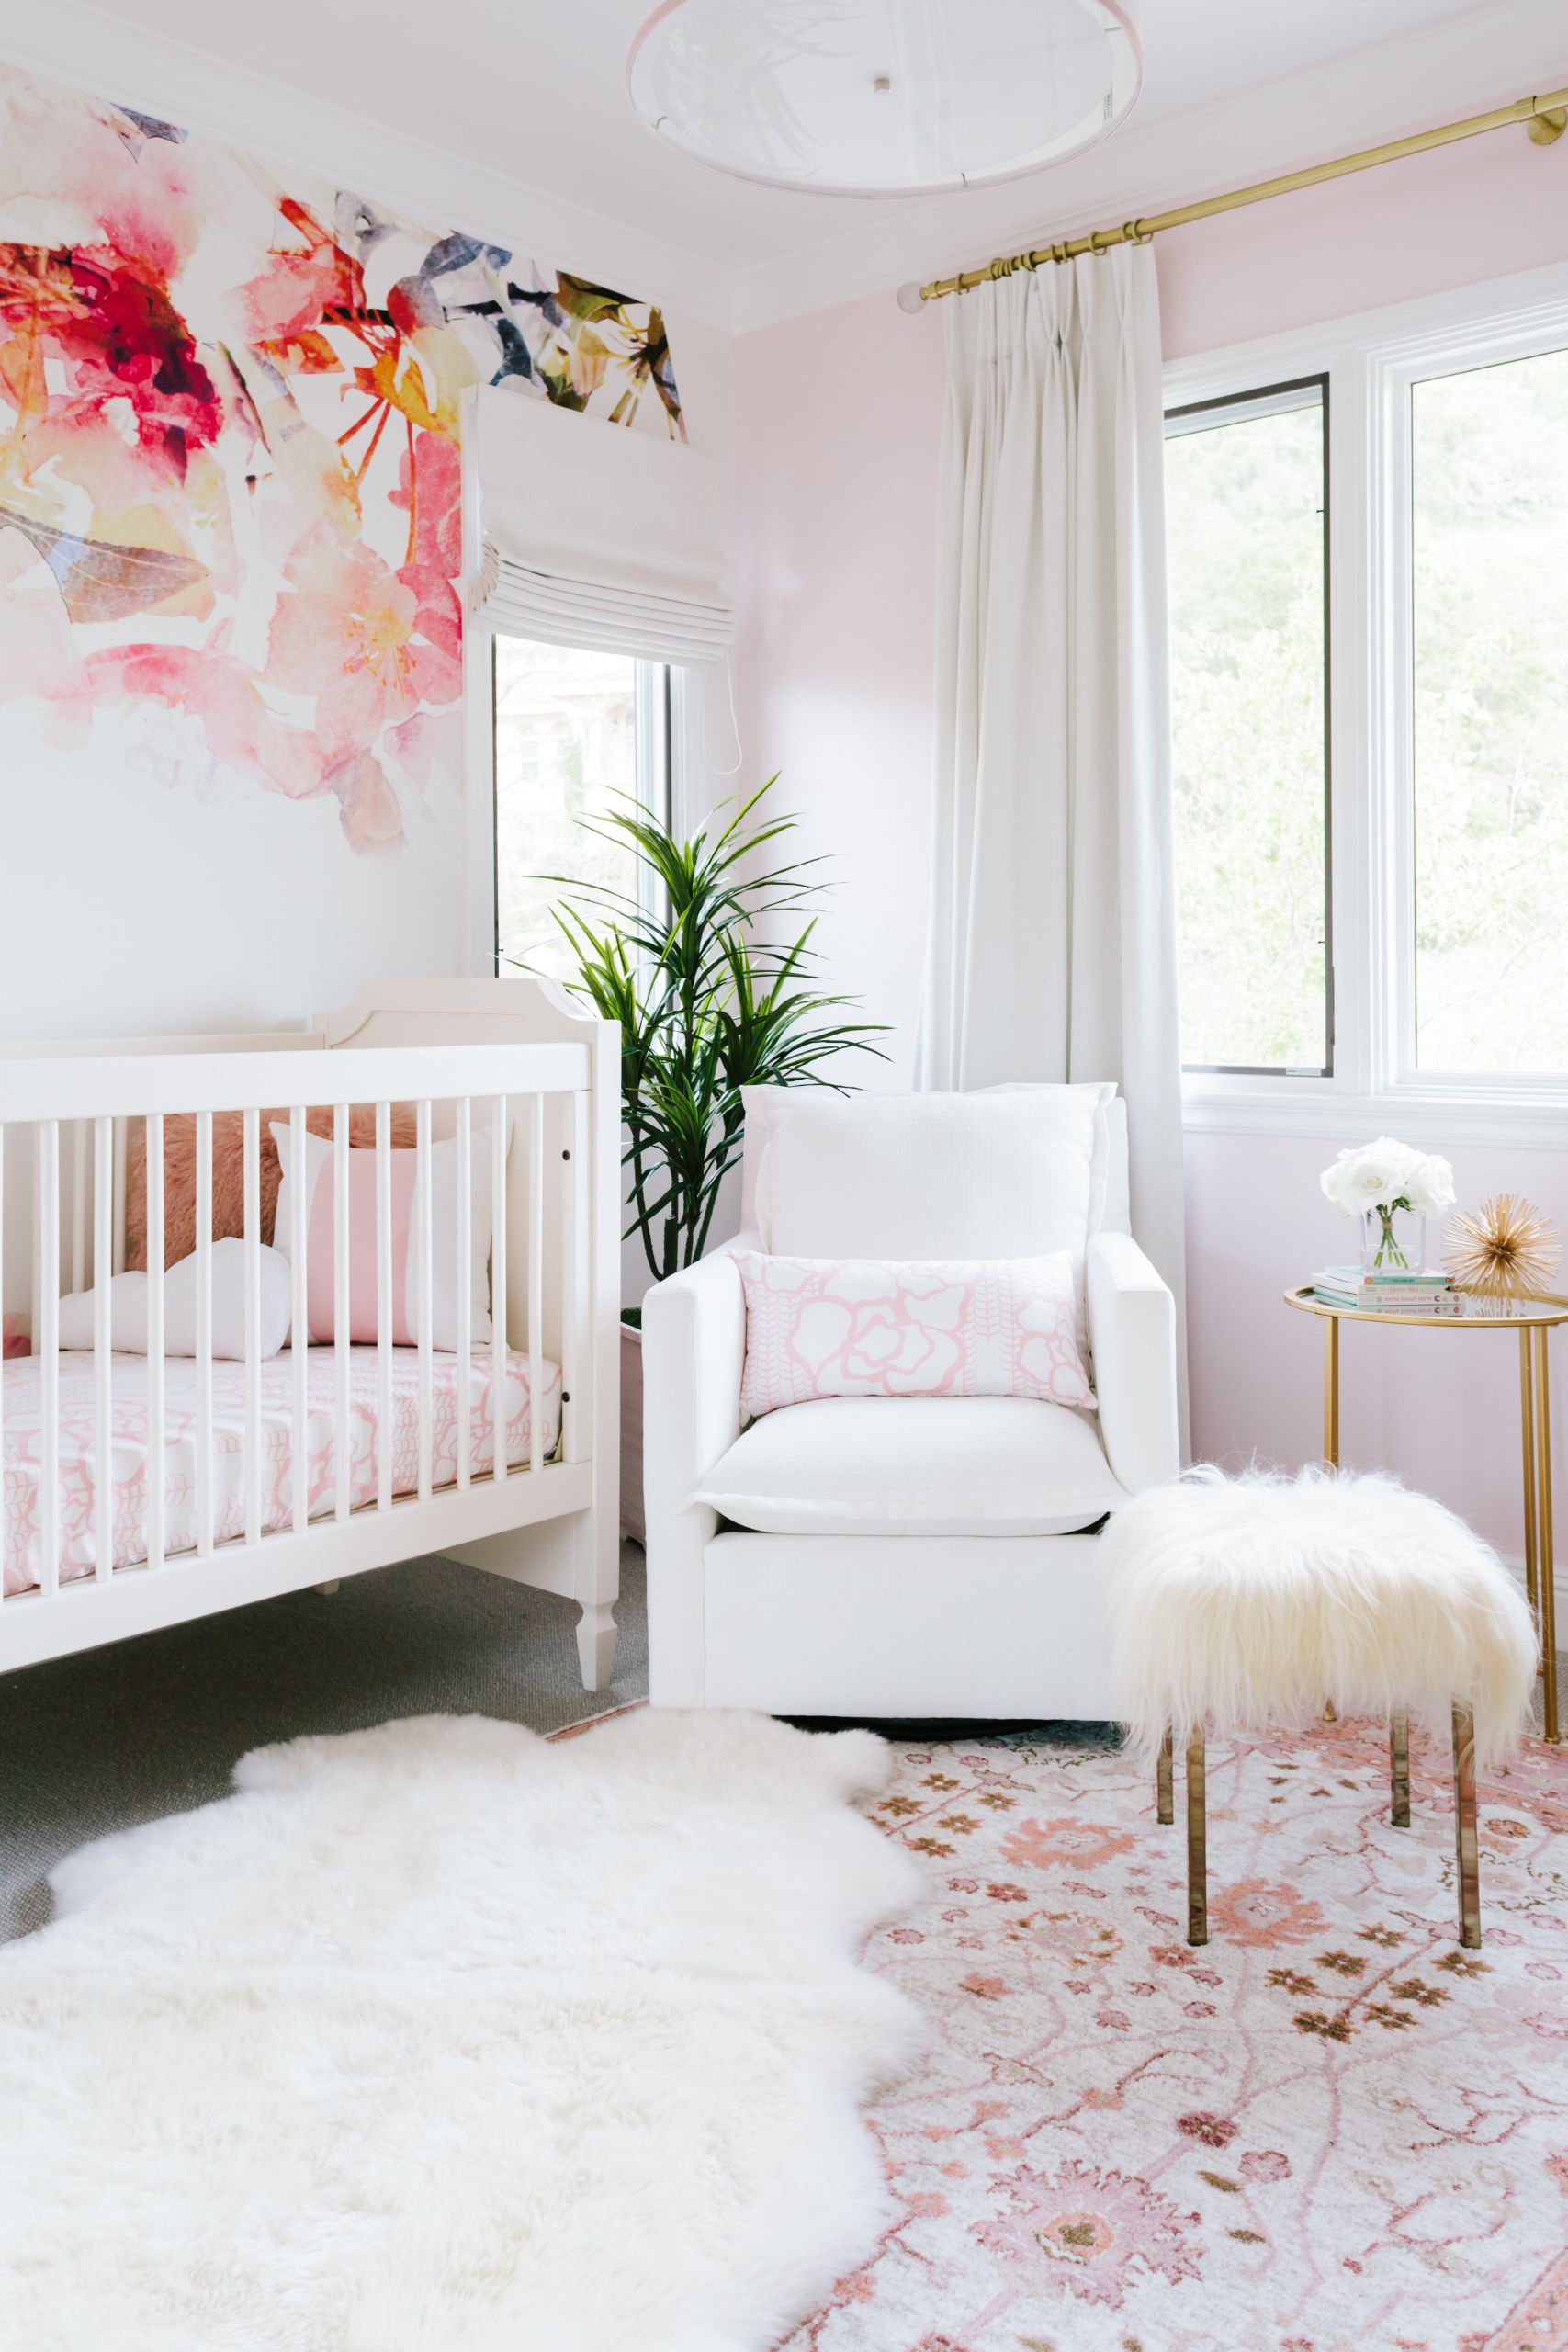 D.I.Y Baby Girl Room Decorations
 Floral Nursery Inspiration